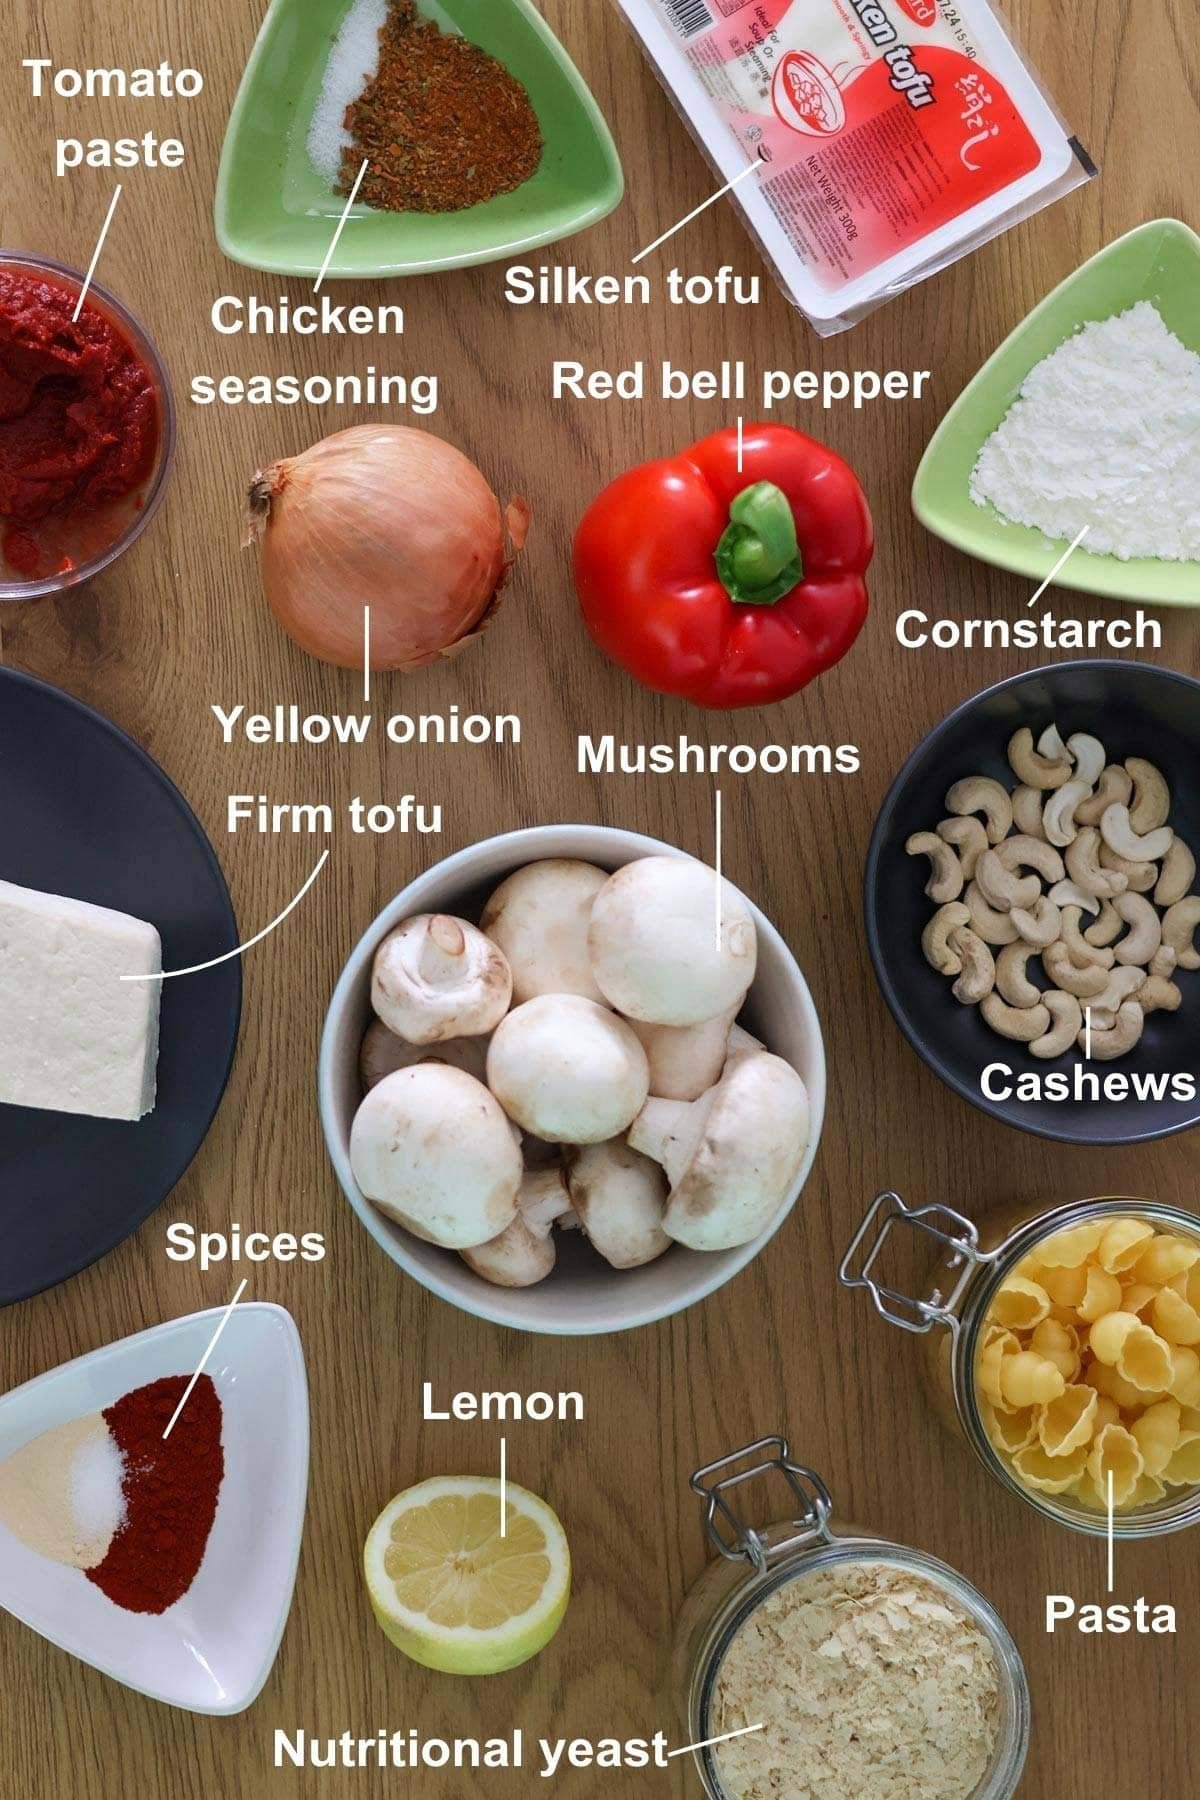 The ingredients for the Healthy Vegan Mushroom Stroganoff on a wooden table.